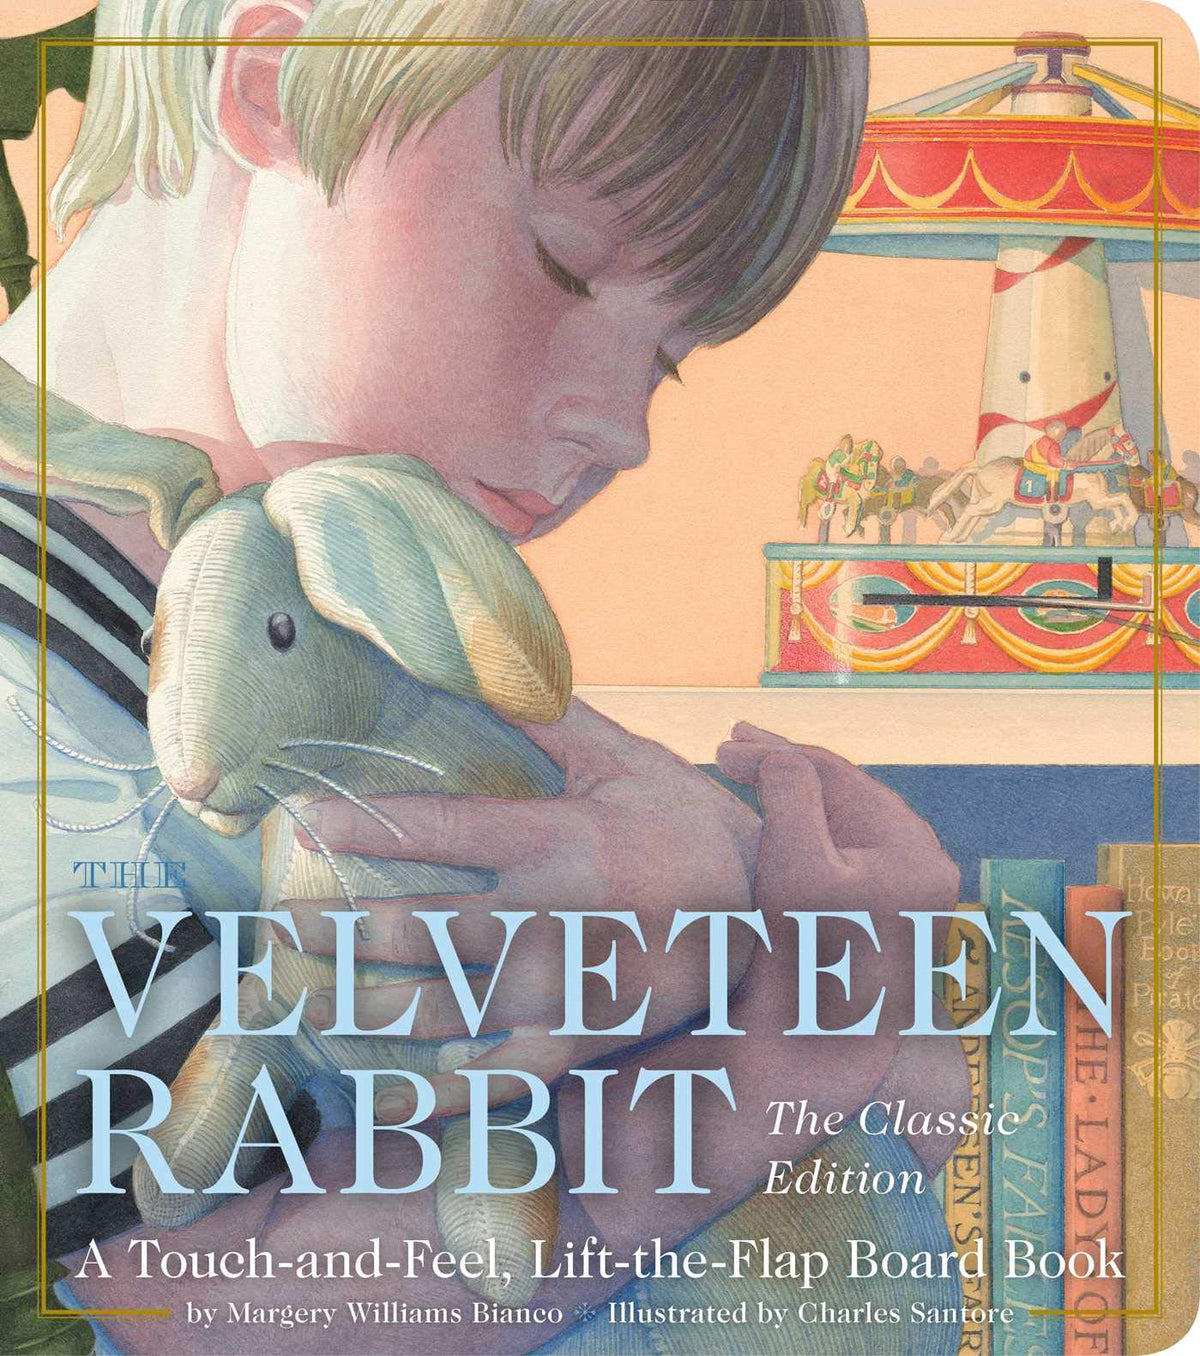 The Velveteen Rabbit (Touch and Feel Book) by Margery Williams Bianco